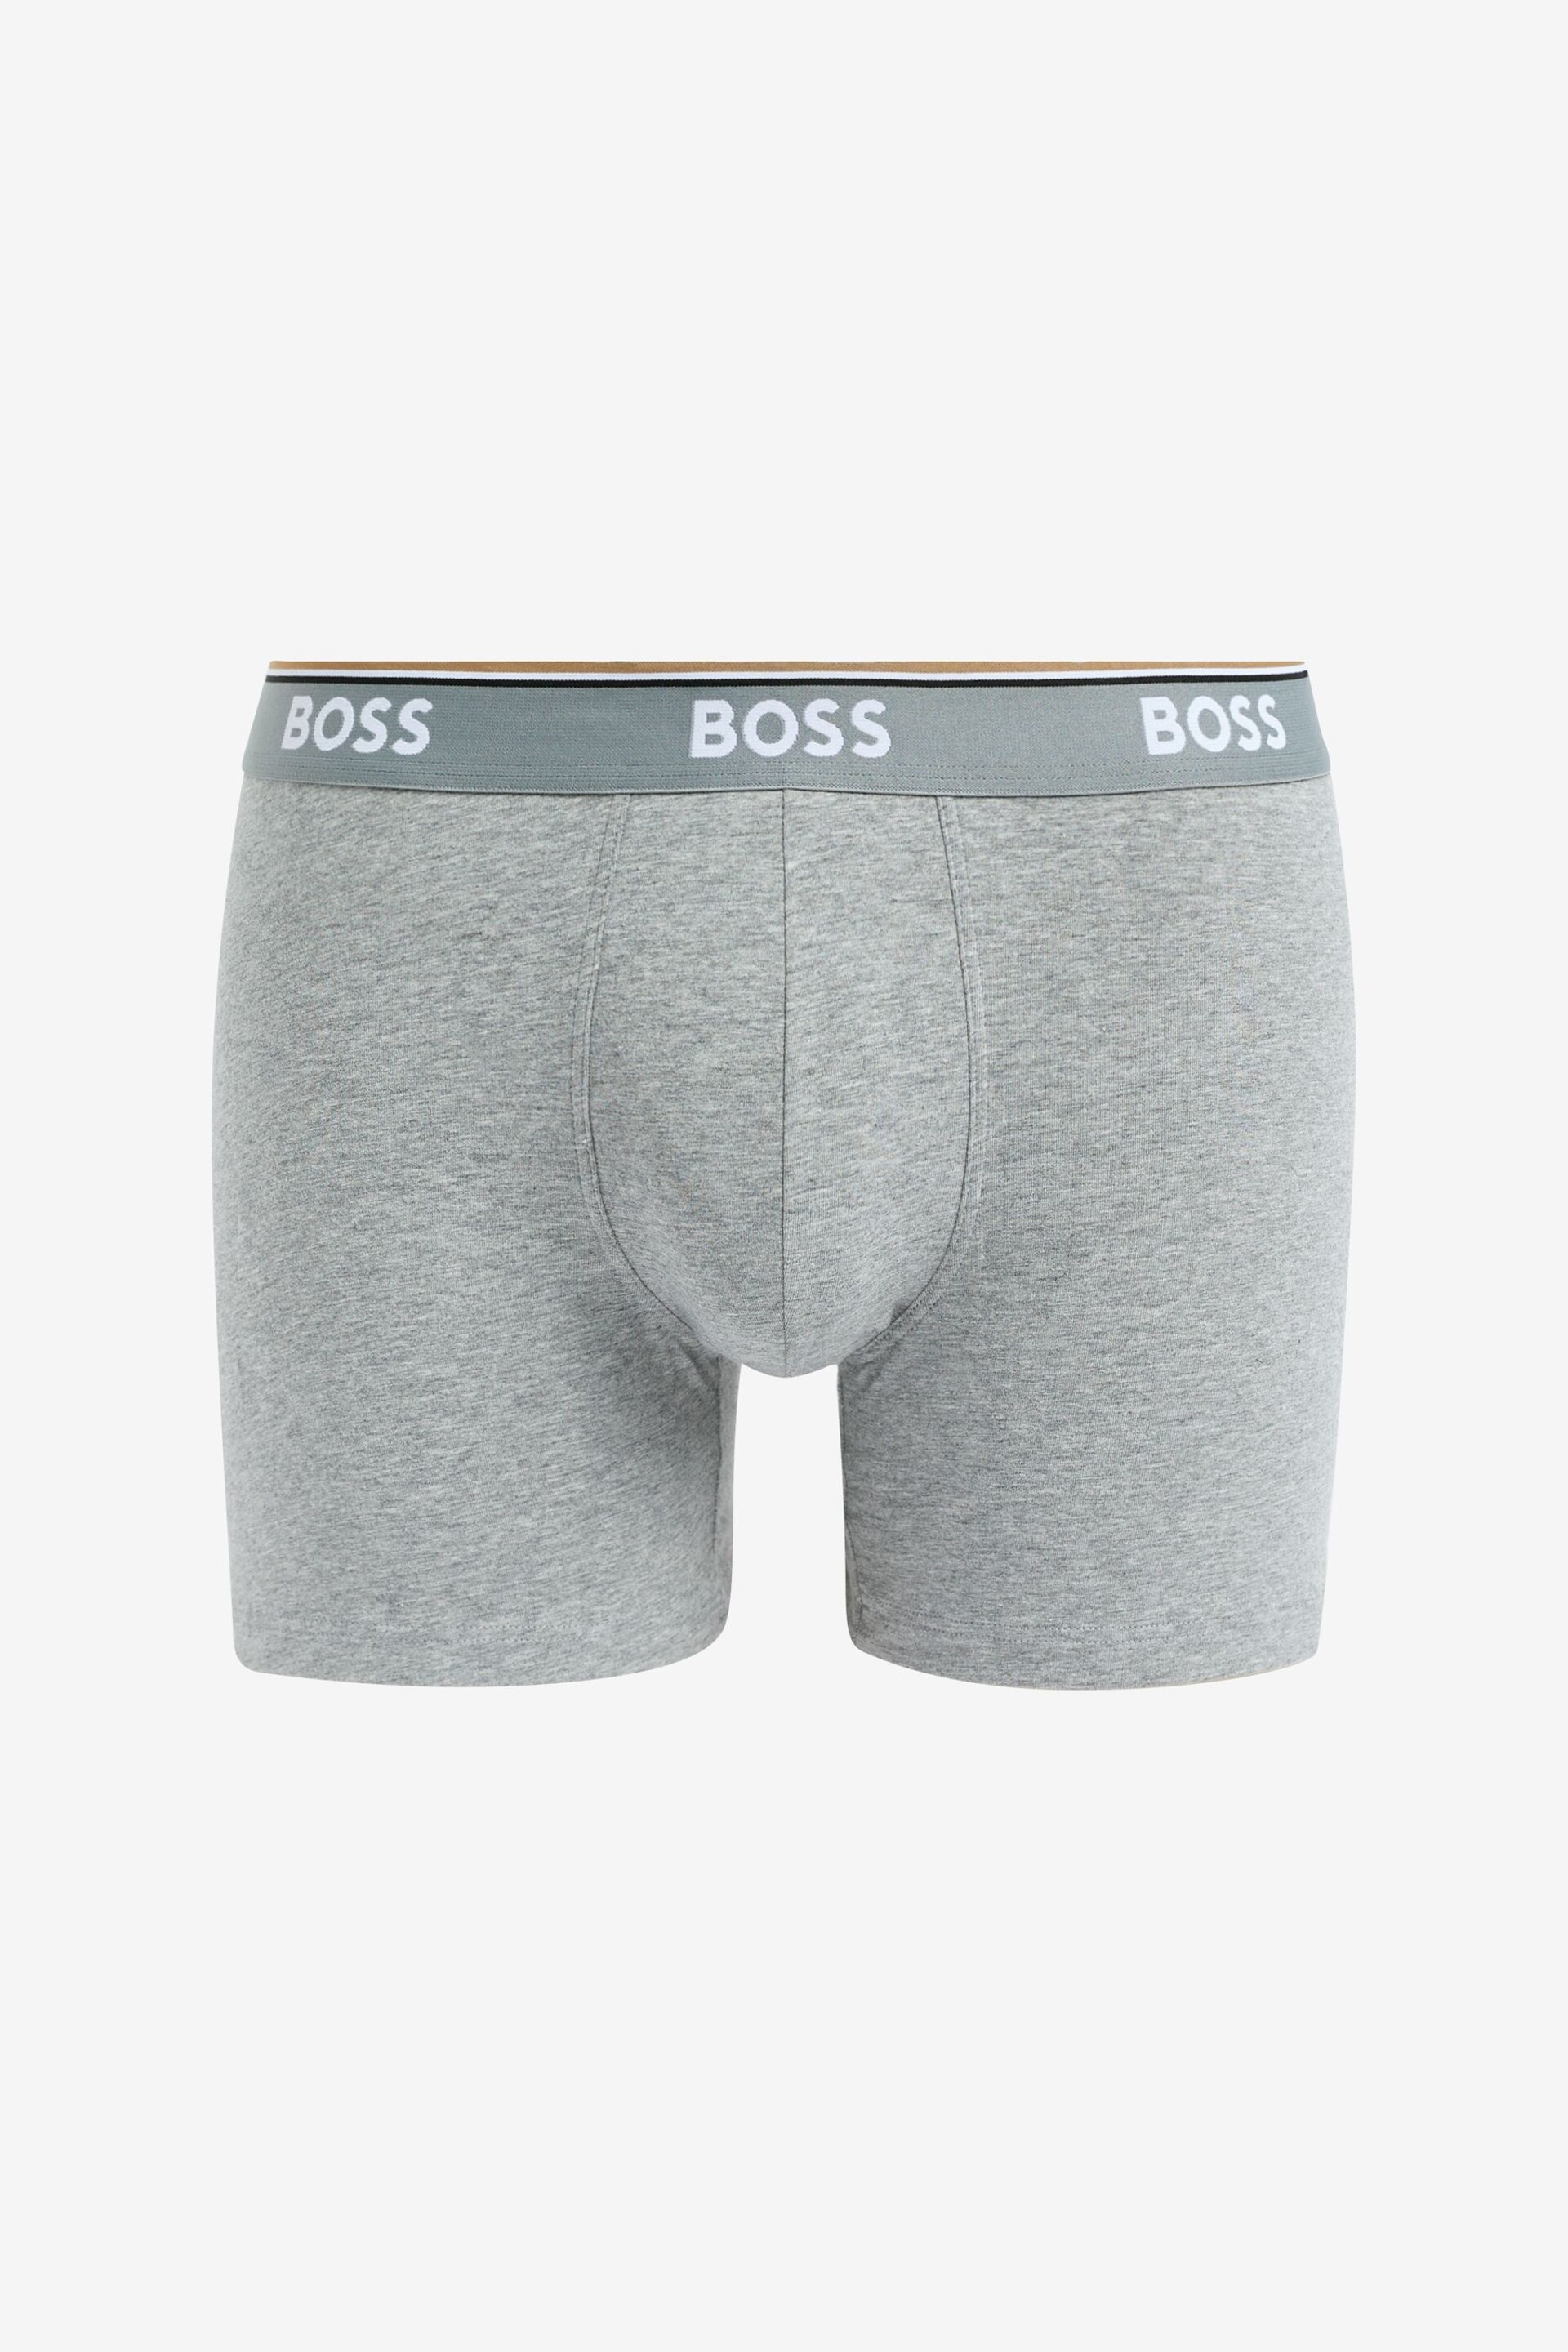 BOSS Grey Logo Waistband Boxer Briefs 3 Pack in Stretch Cotton - Image 2 of 4